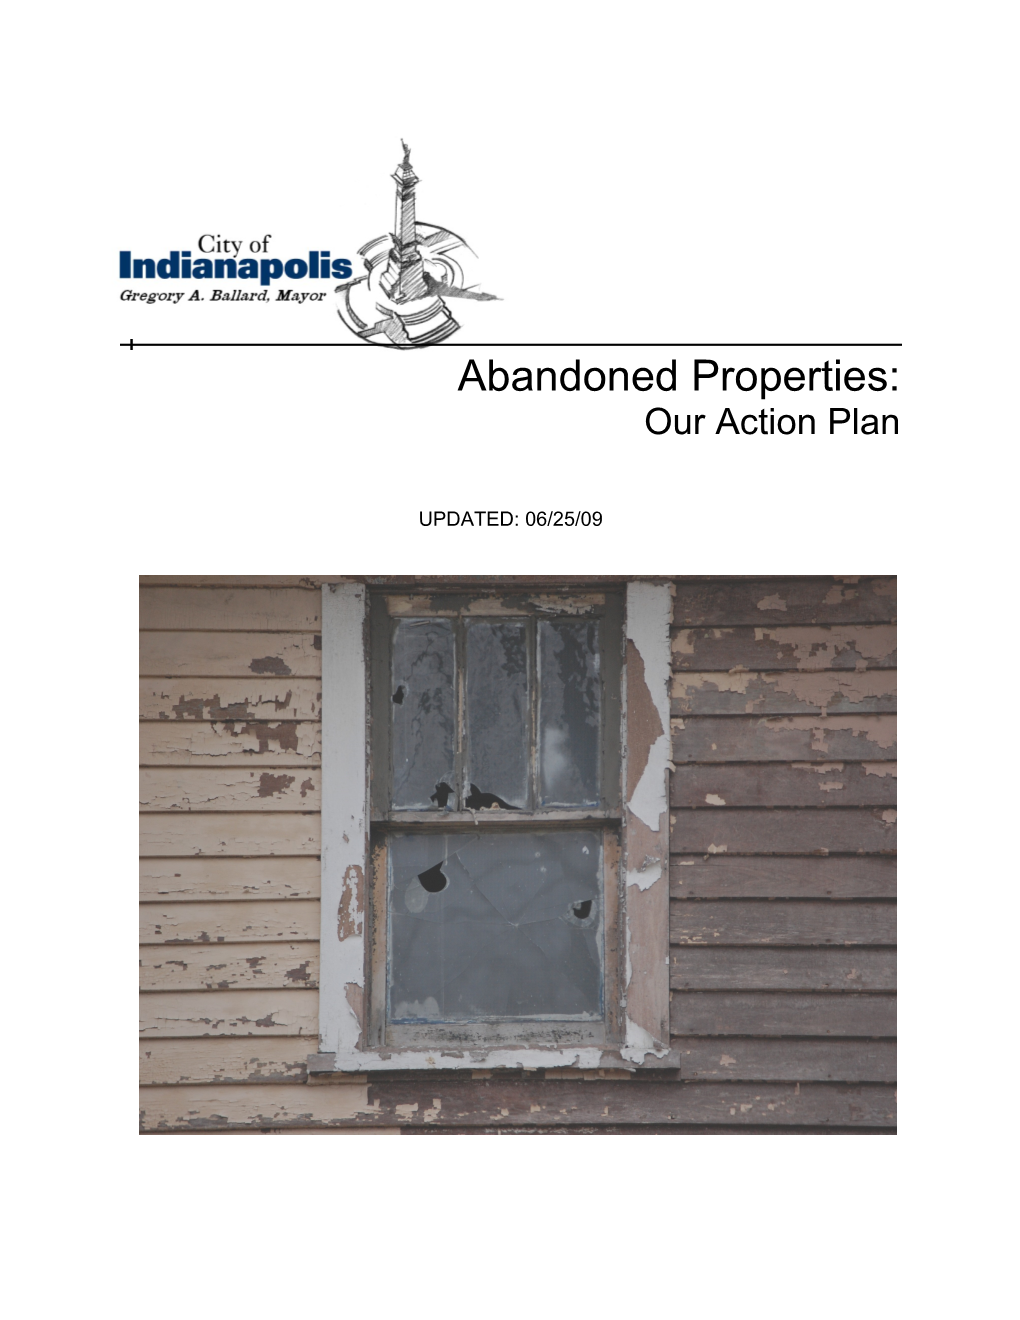 Abandoned Property Action Plan